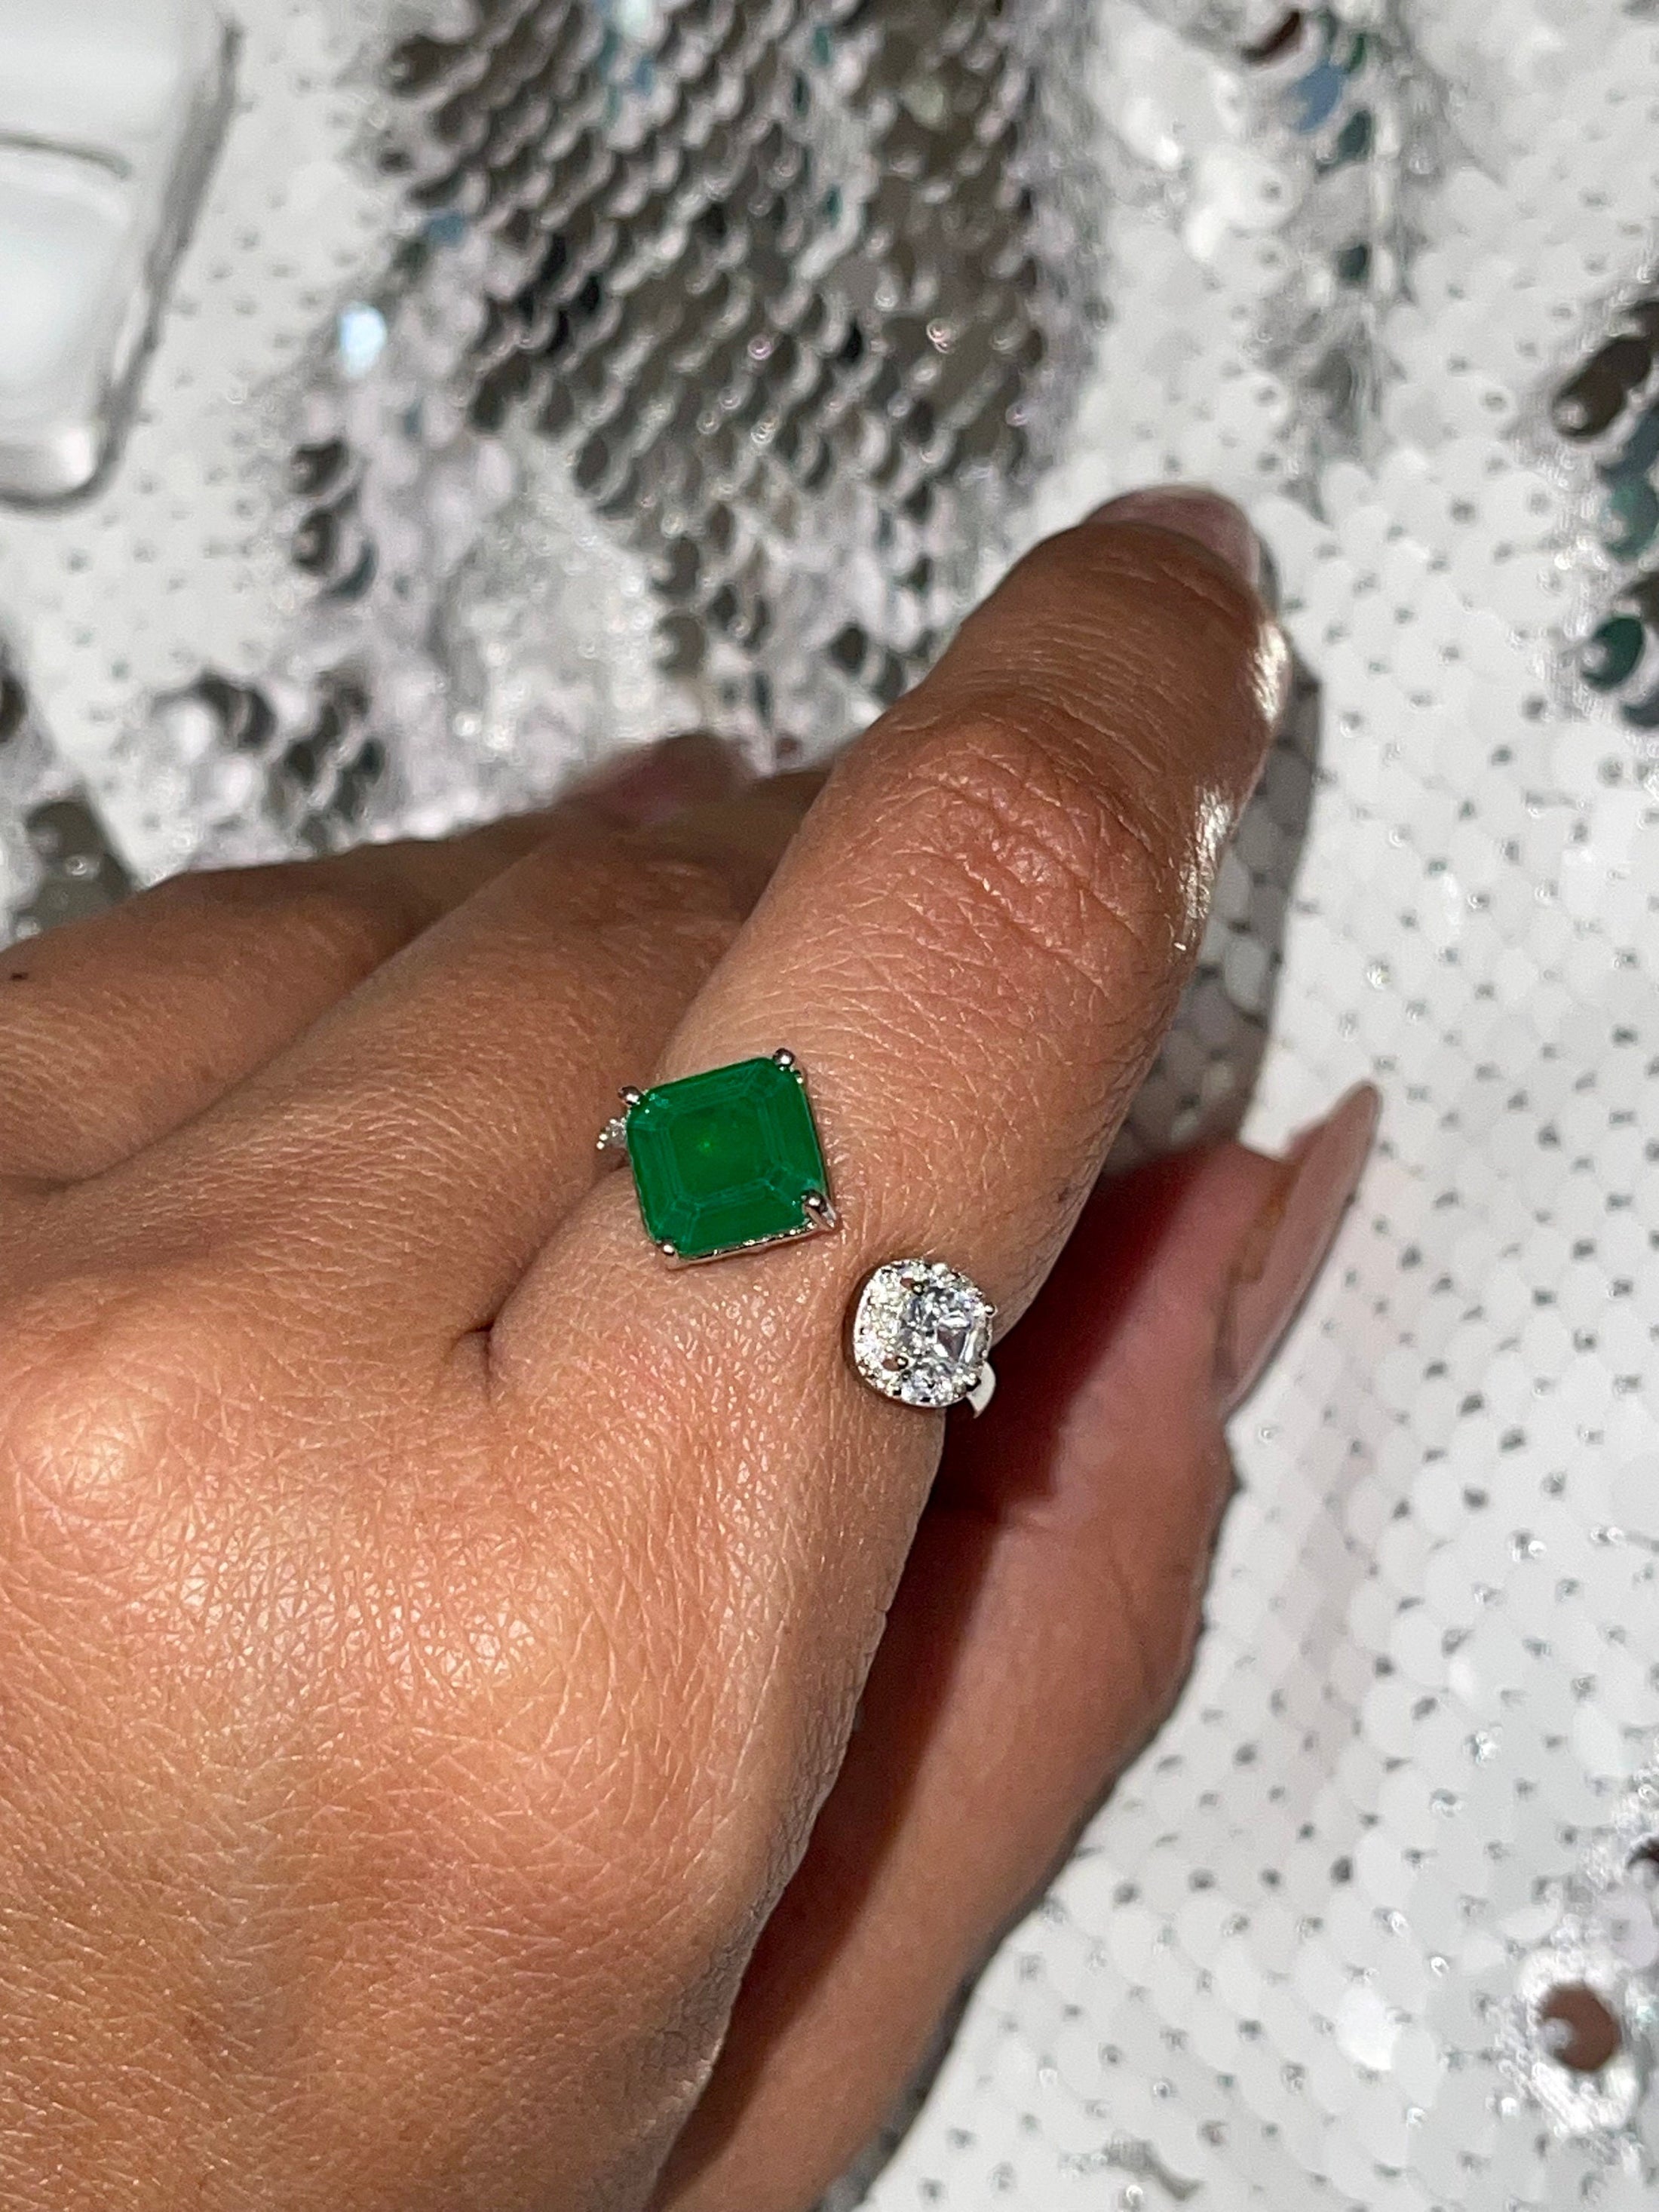 Emerald crystal ring, 14k white gold vermeil w/ Swarovski and Emerald Crystals, Gift for Her, Anniversary Birthday Present, Christmas gift